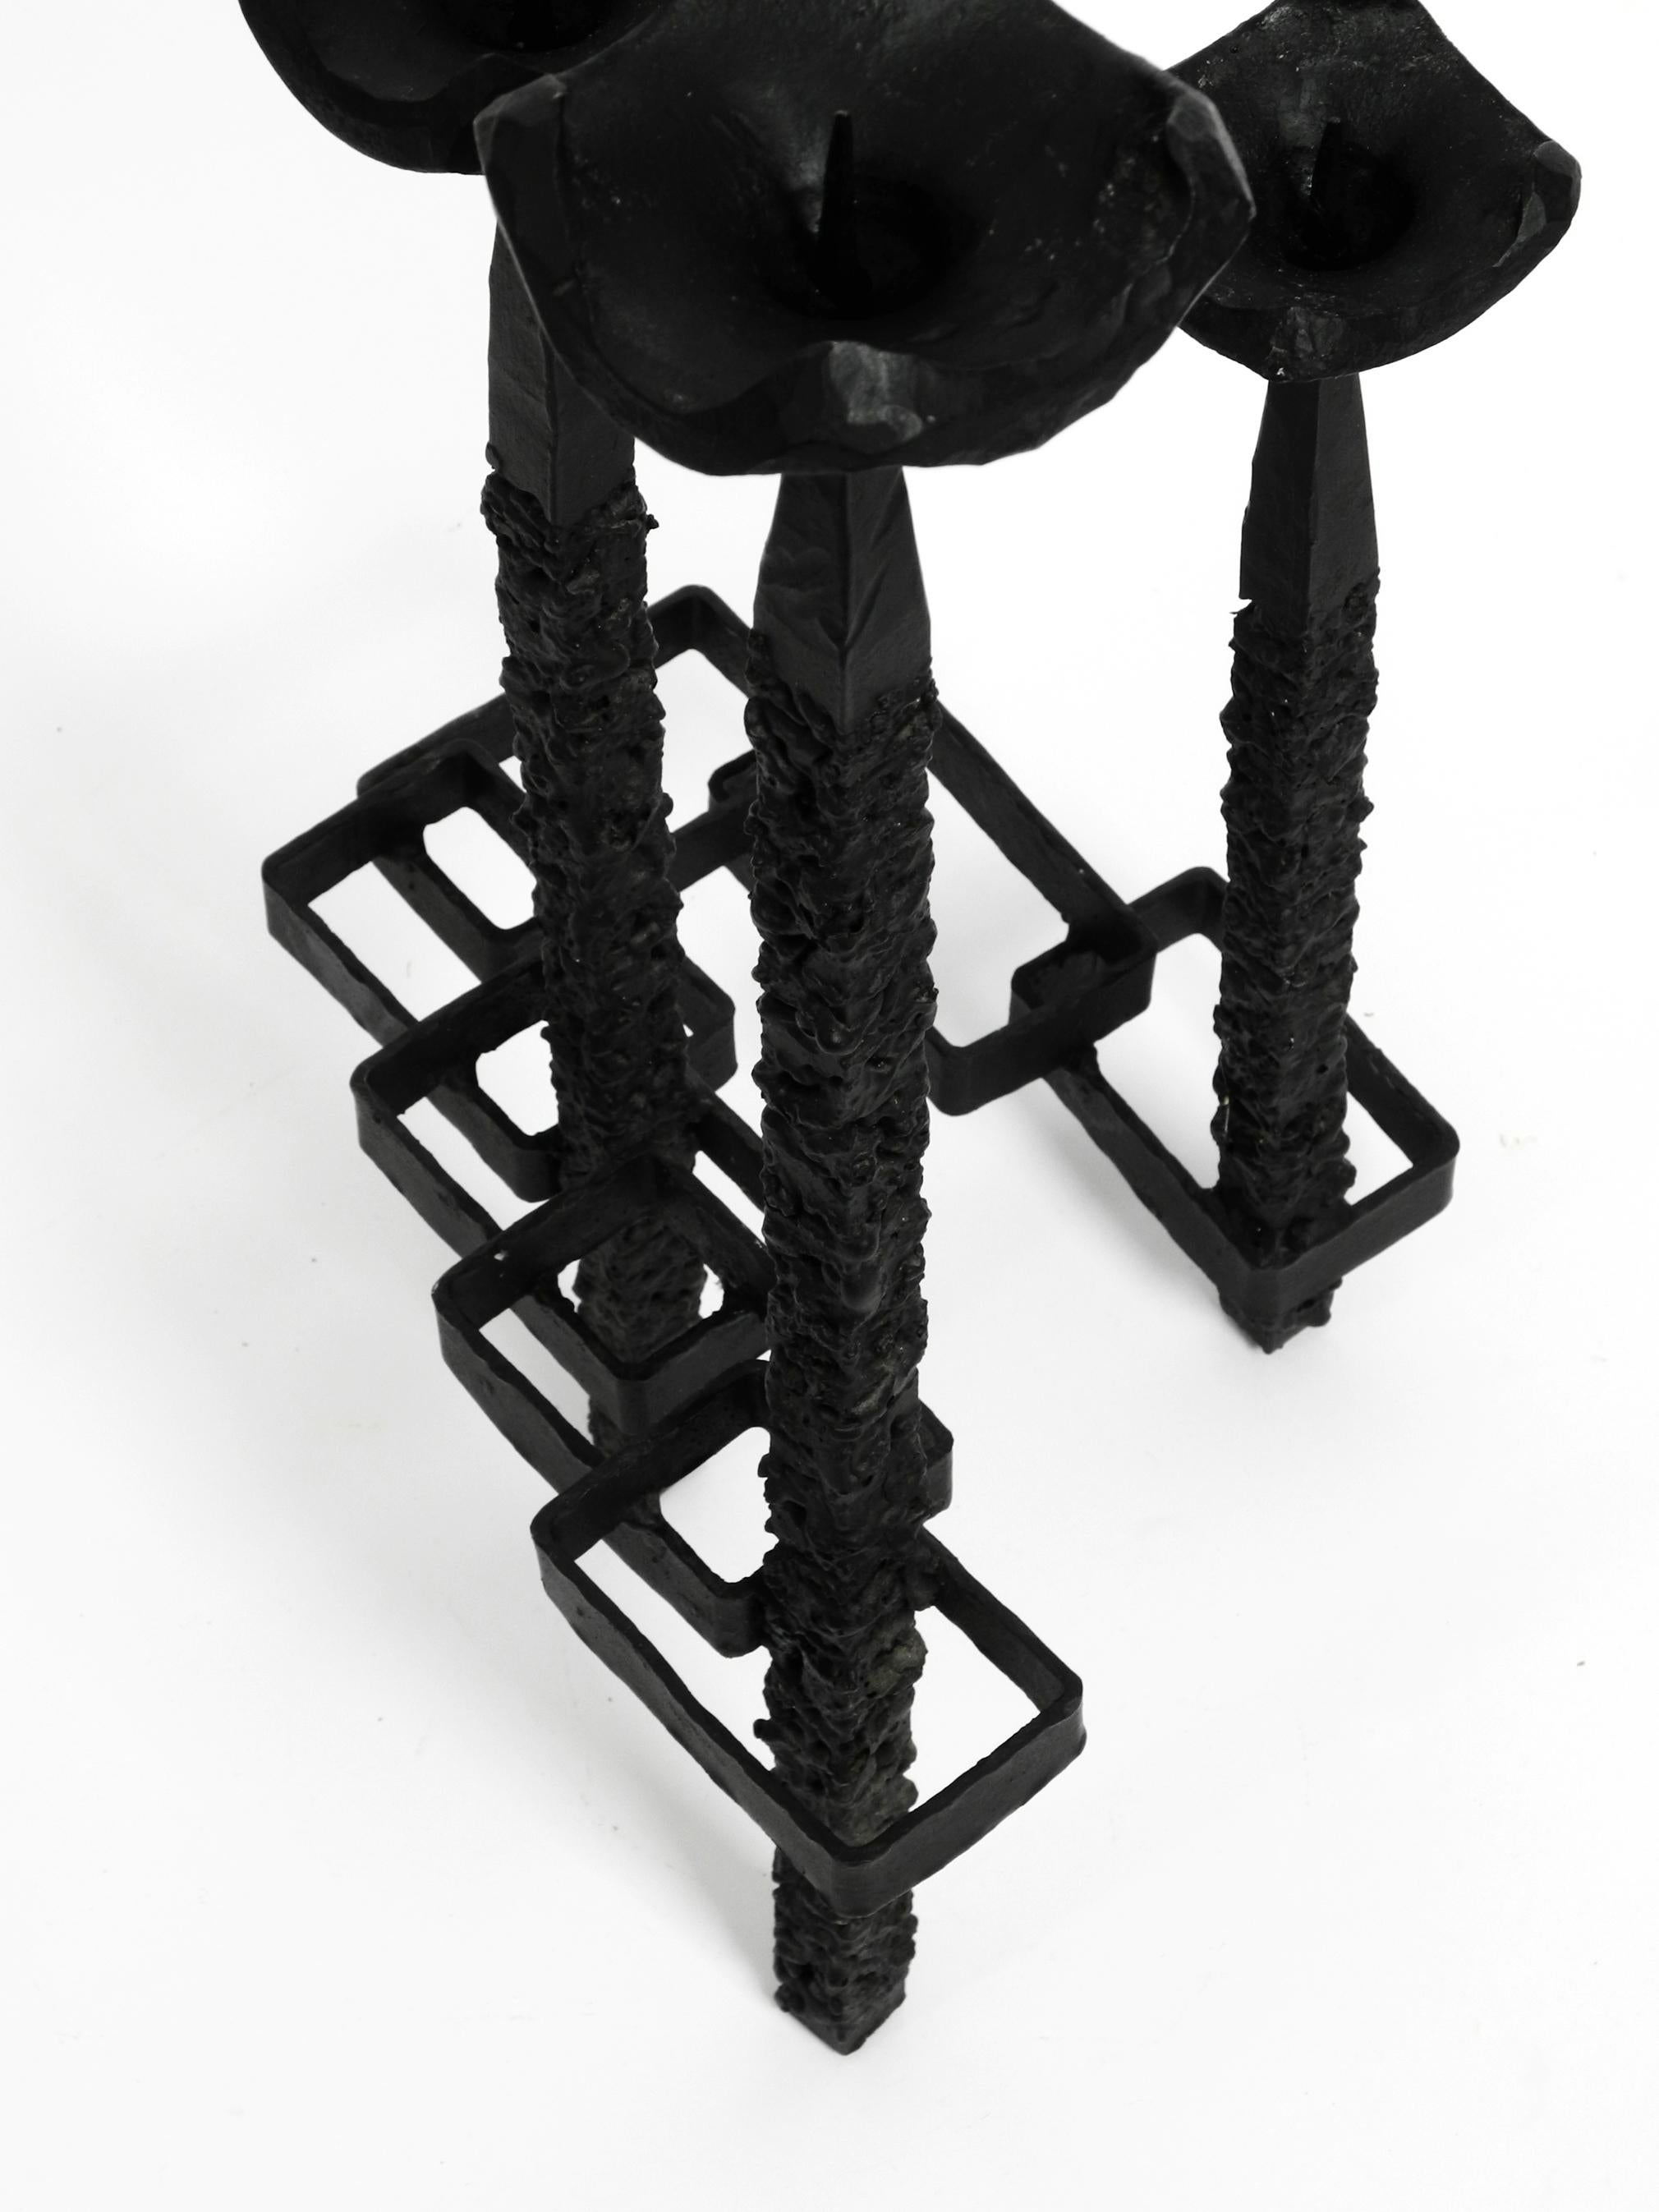 German Large Floor or Table Candle Holder Made of Wrought Iron in Brutalist Design  For Sale